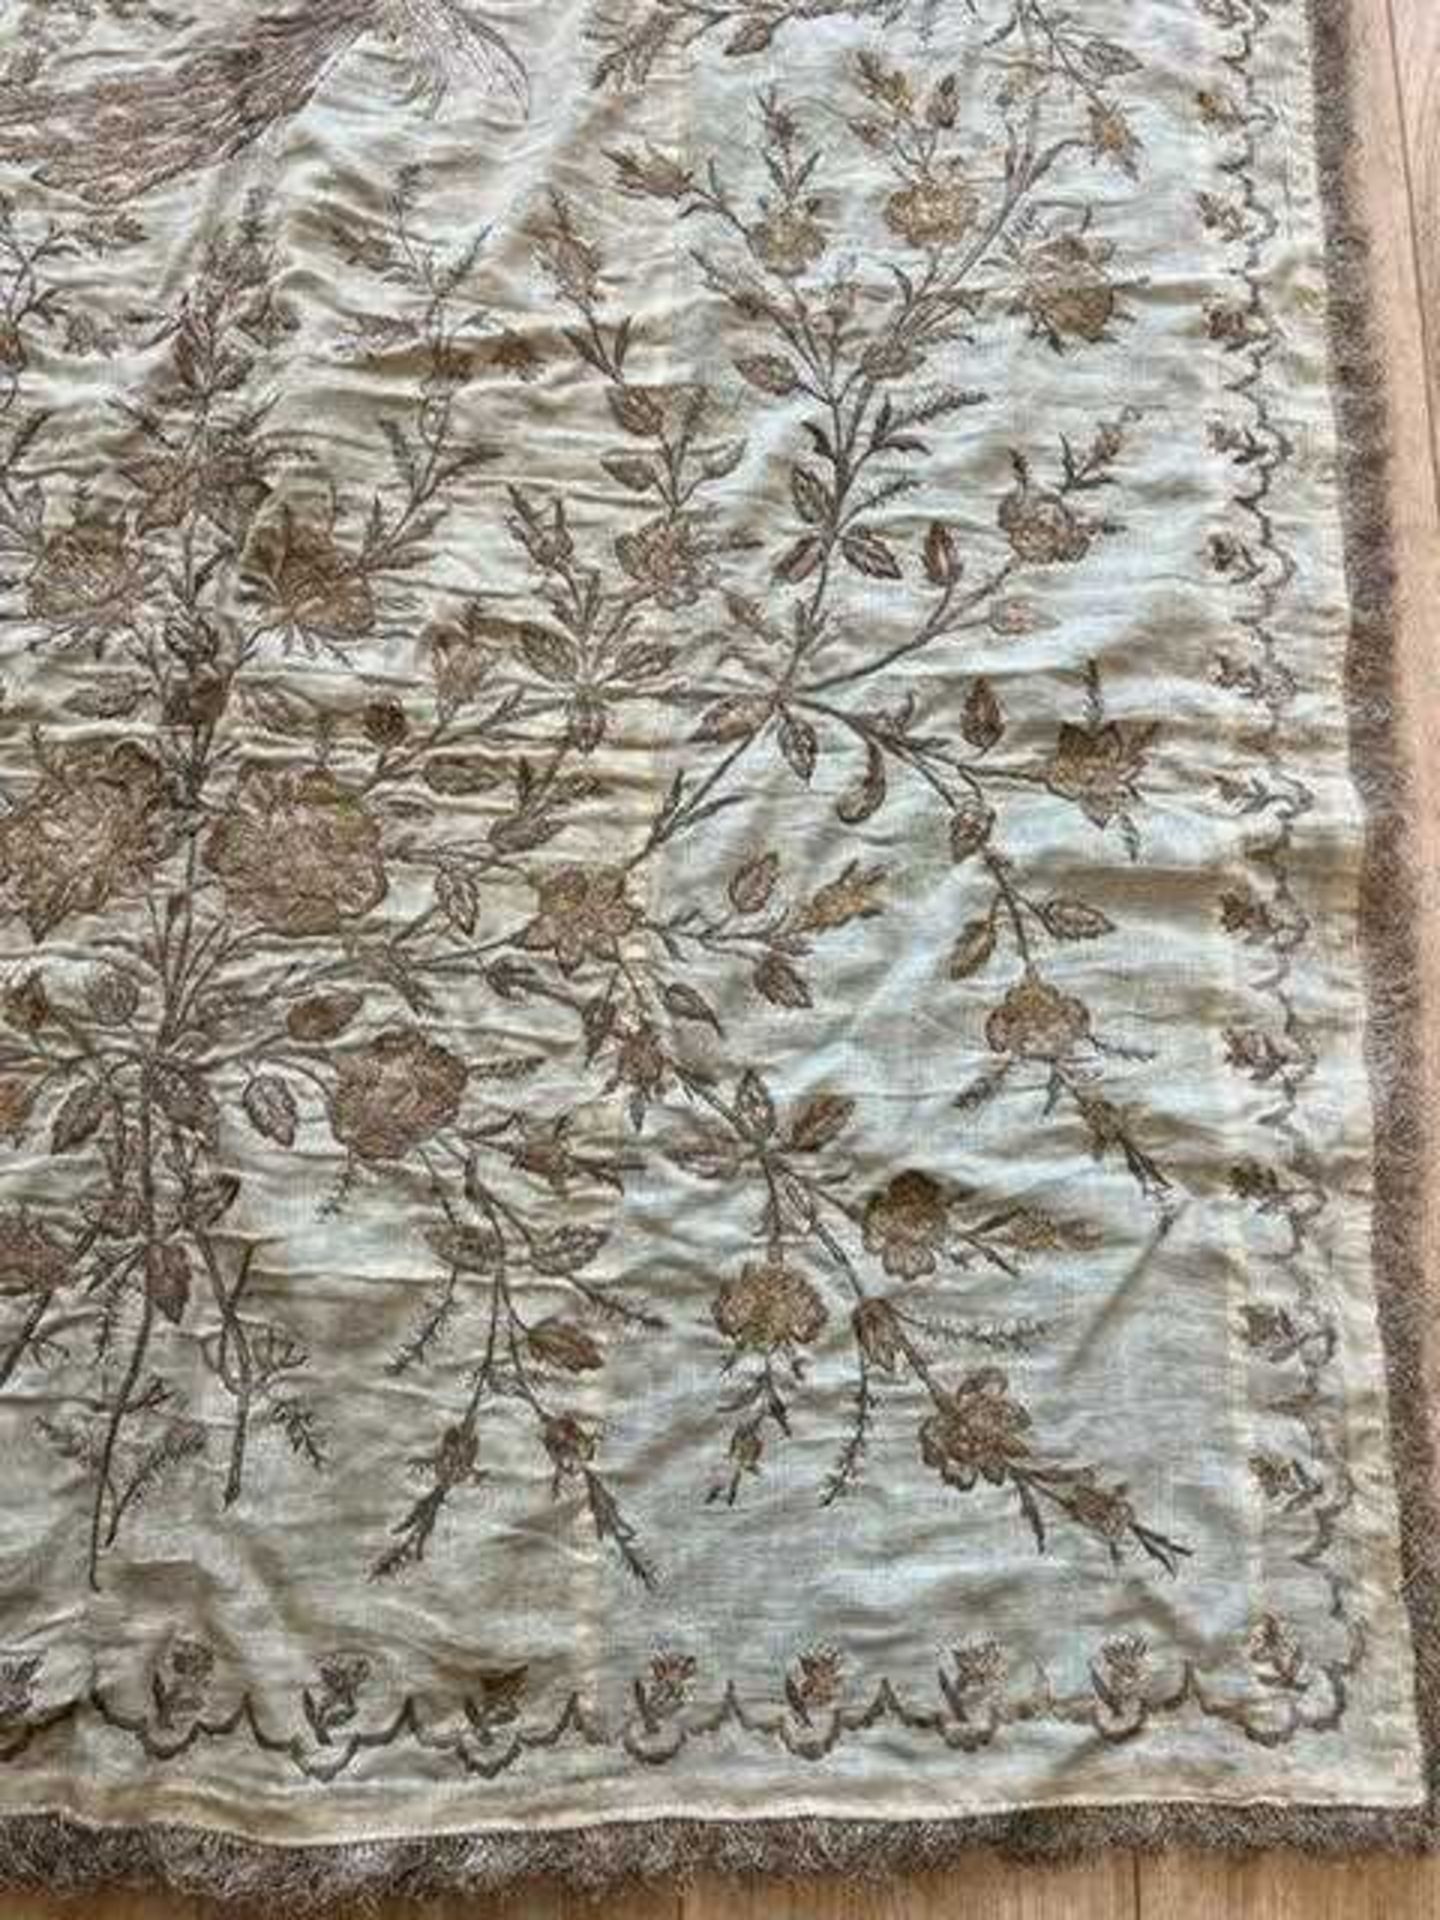 A 19TH CENTURY OTTOMAN GOLD AND SILVER THREAD EMBROIDERED BANNER - Image 2 of 18